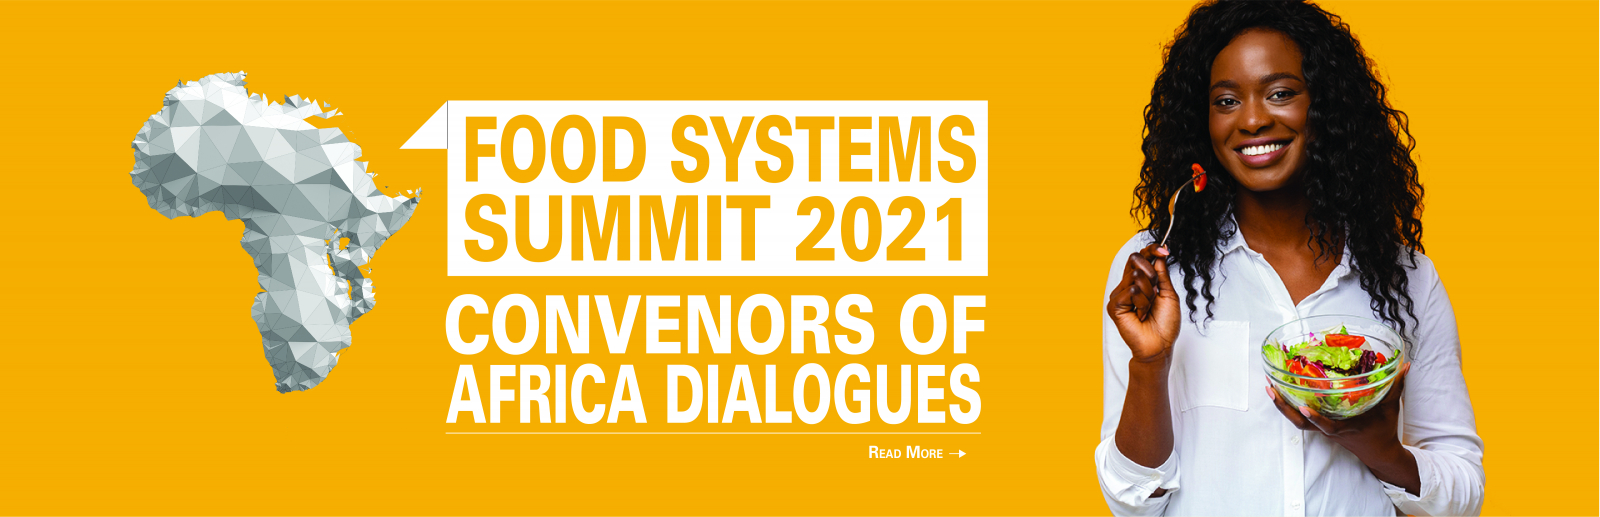 Convenors of Africa Dialogues